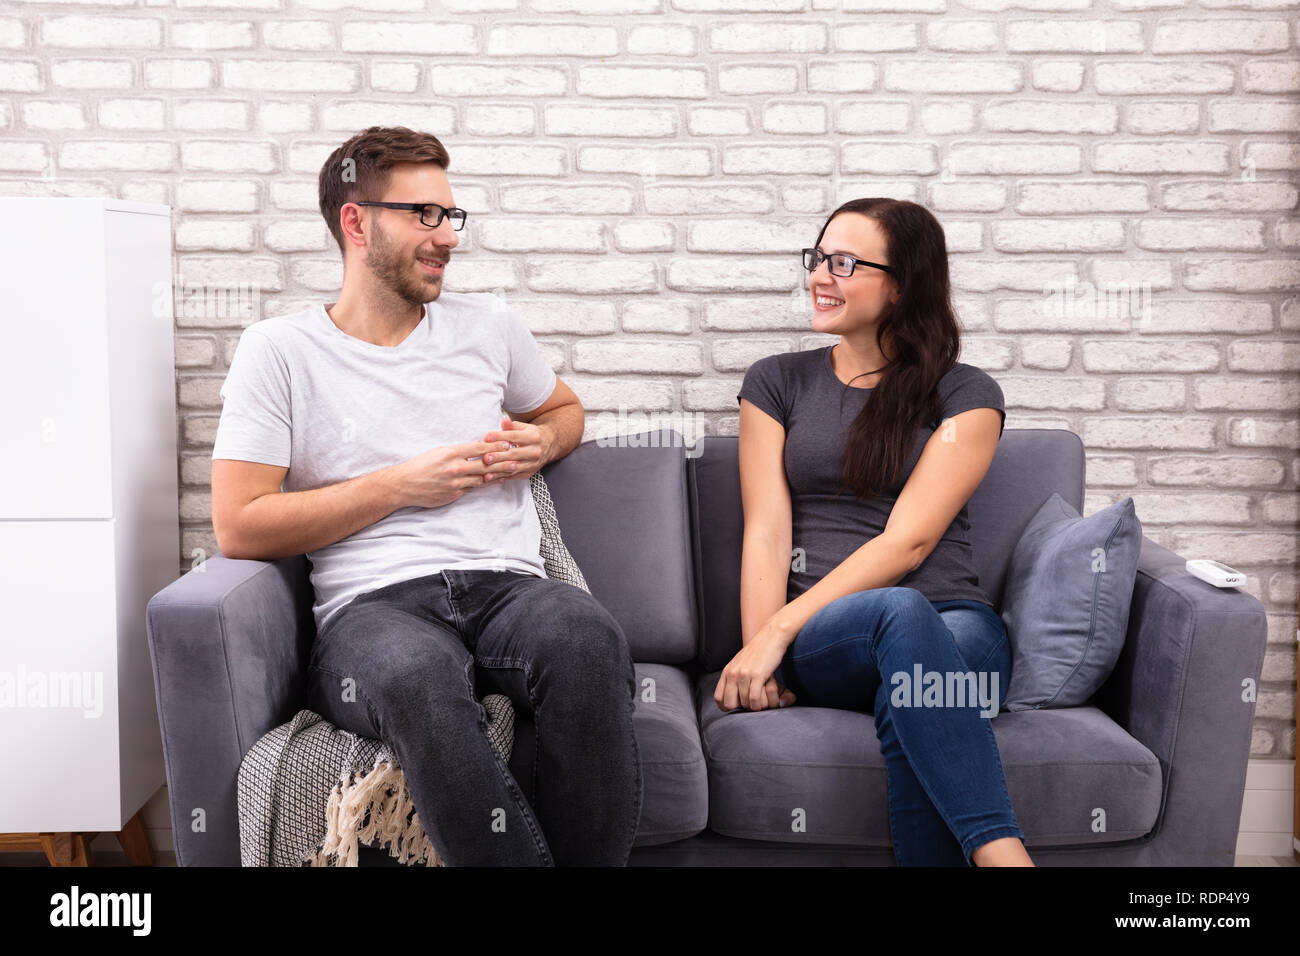 Young Men And Woman Sitting On Sofa Looking At Each Other During Date Stock Photo